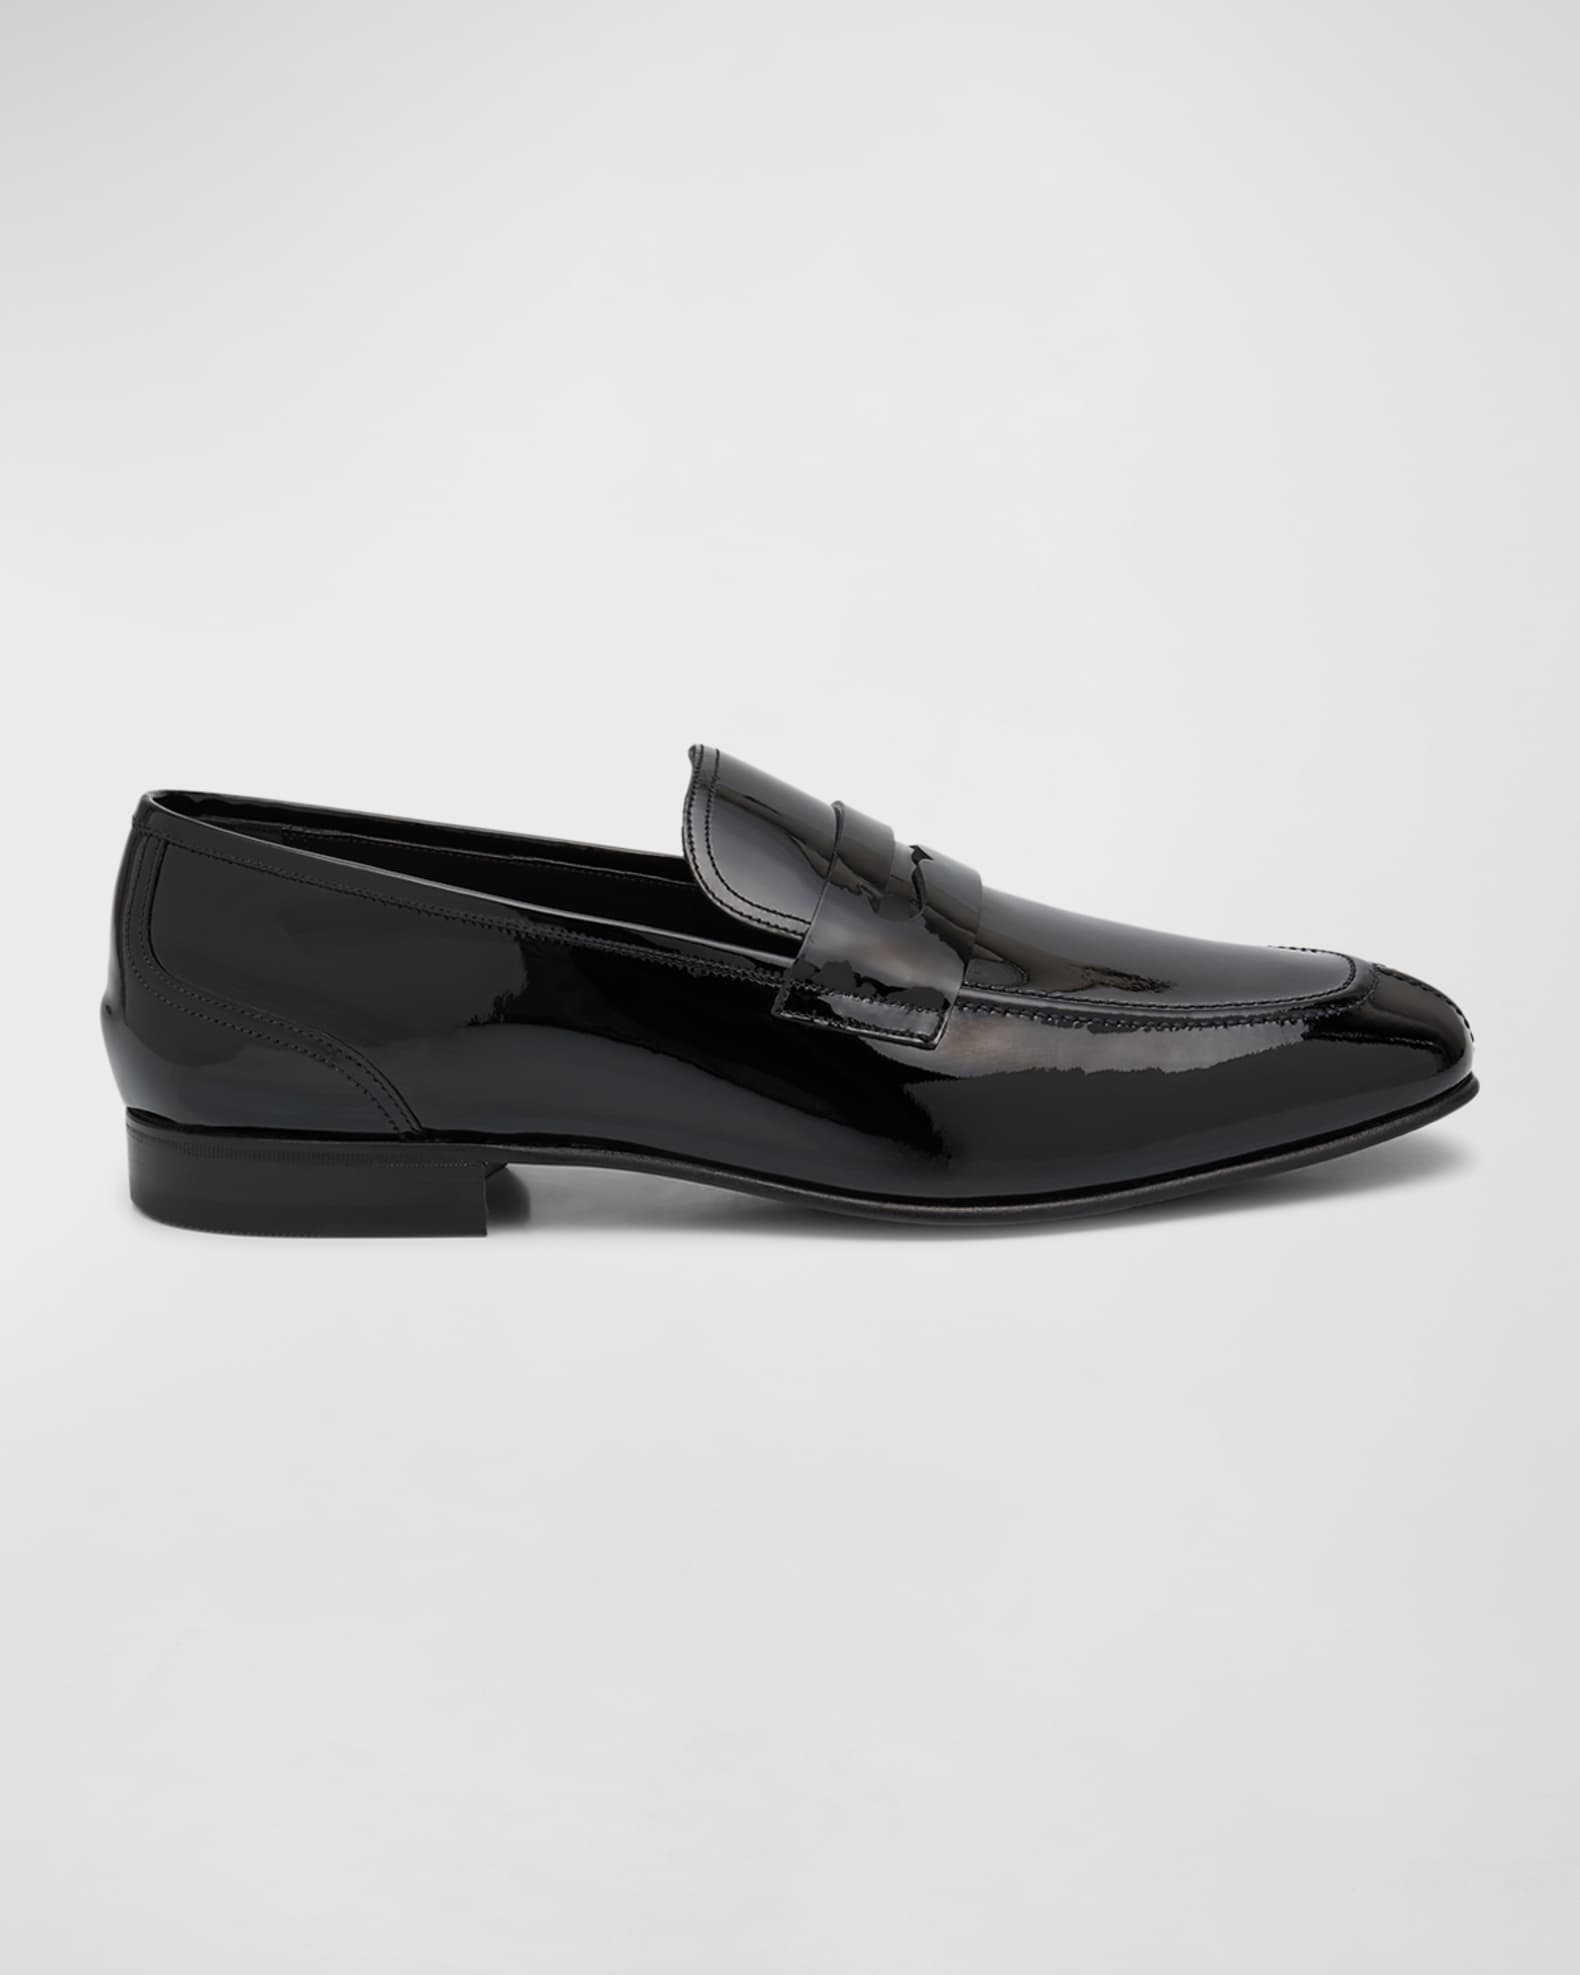 Bally Men's Saix Patent Leather Penny Loafers | Neiman Marcus